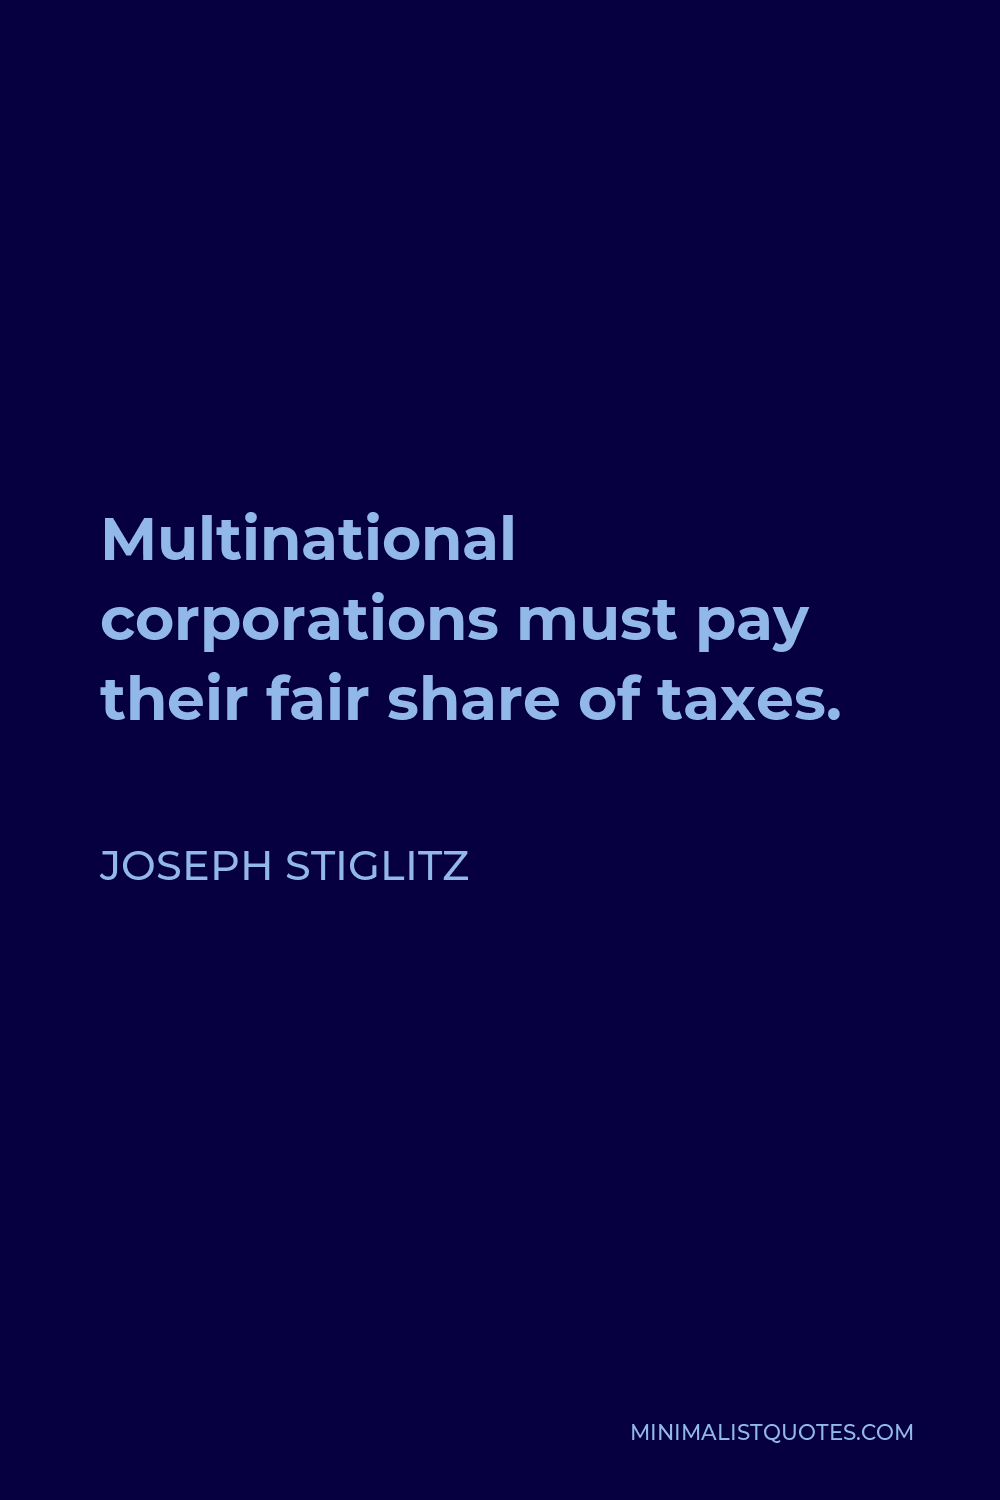 Joseph Stiglitz Quote - Multinational corporations must pay their fair share of taxes.